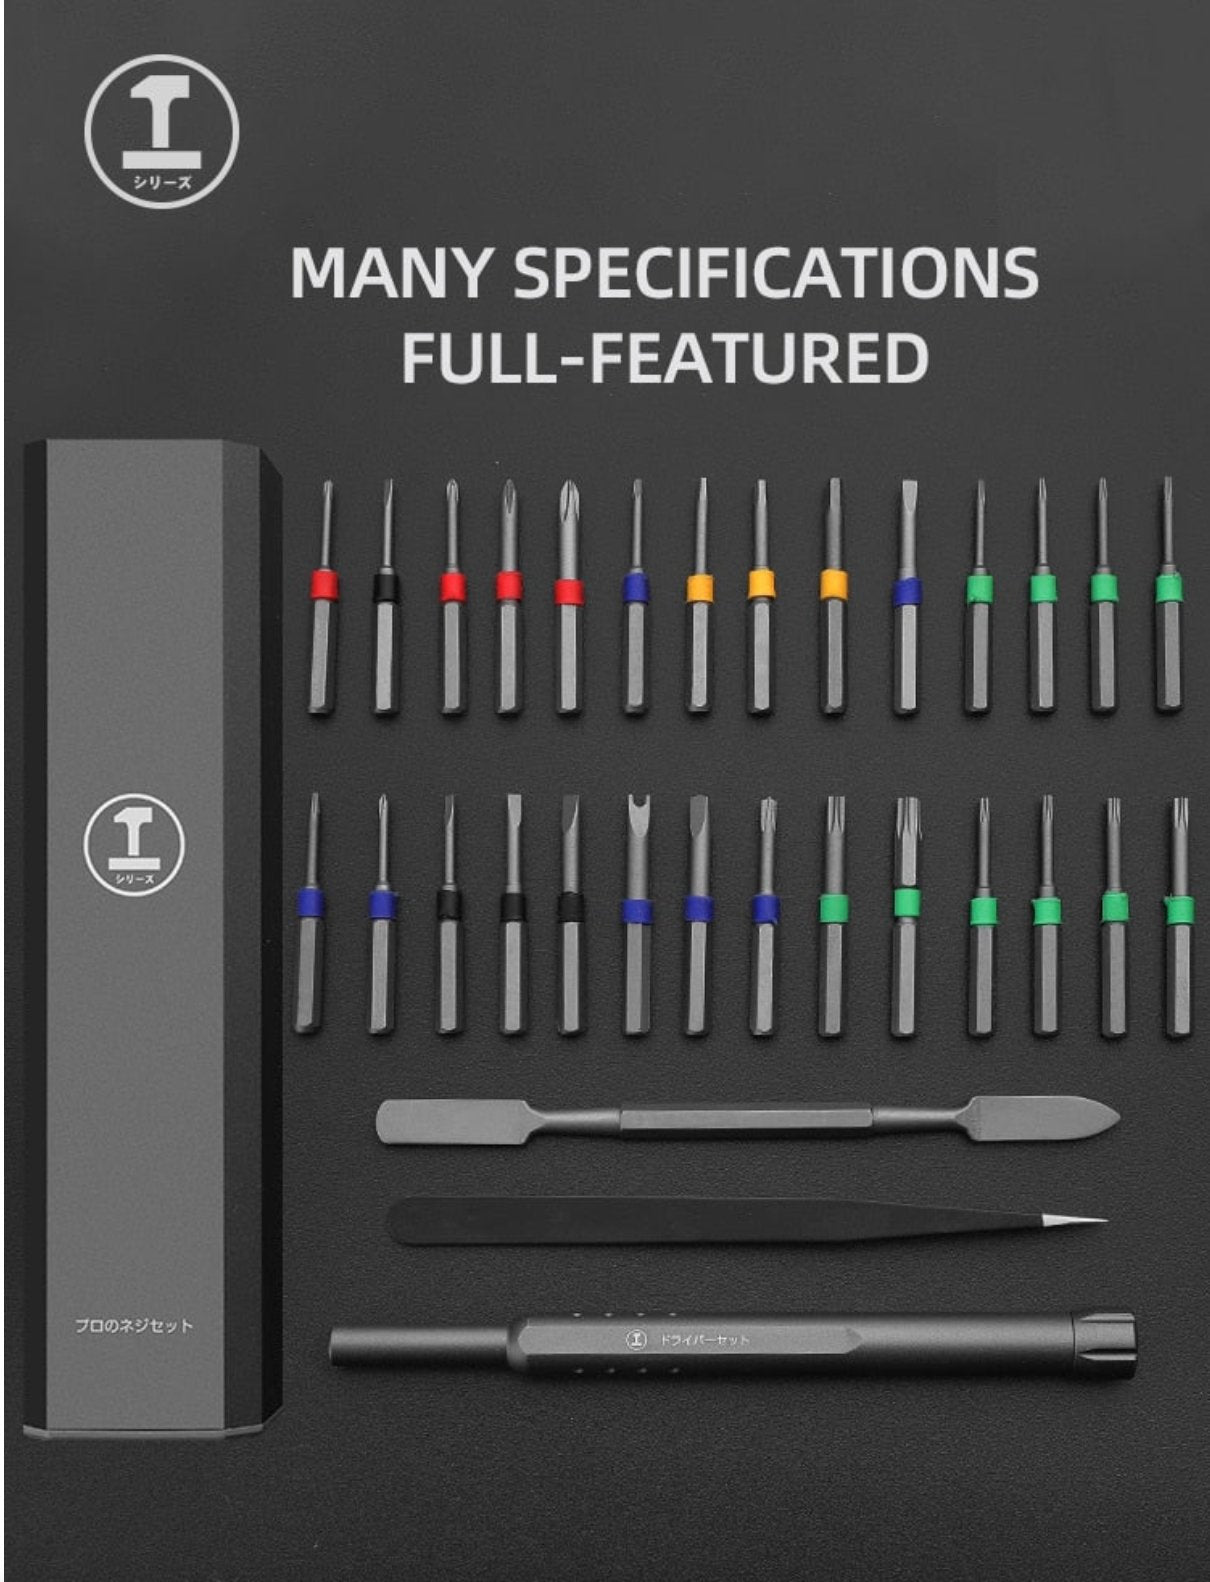 46 in 1 SCREWDRIVER KIT - Home Essentials Store Retail